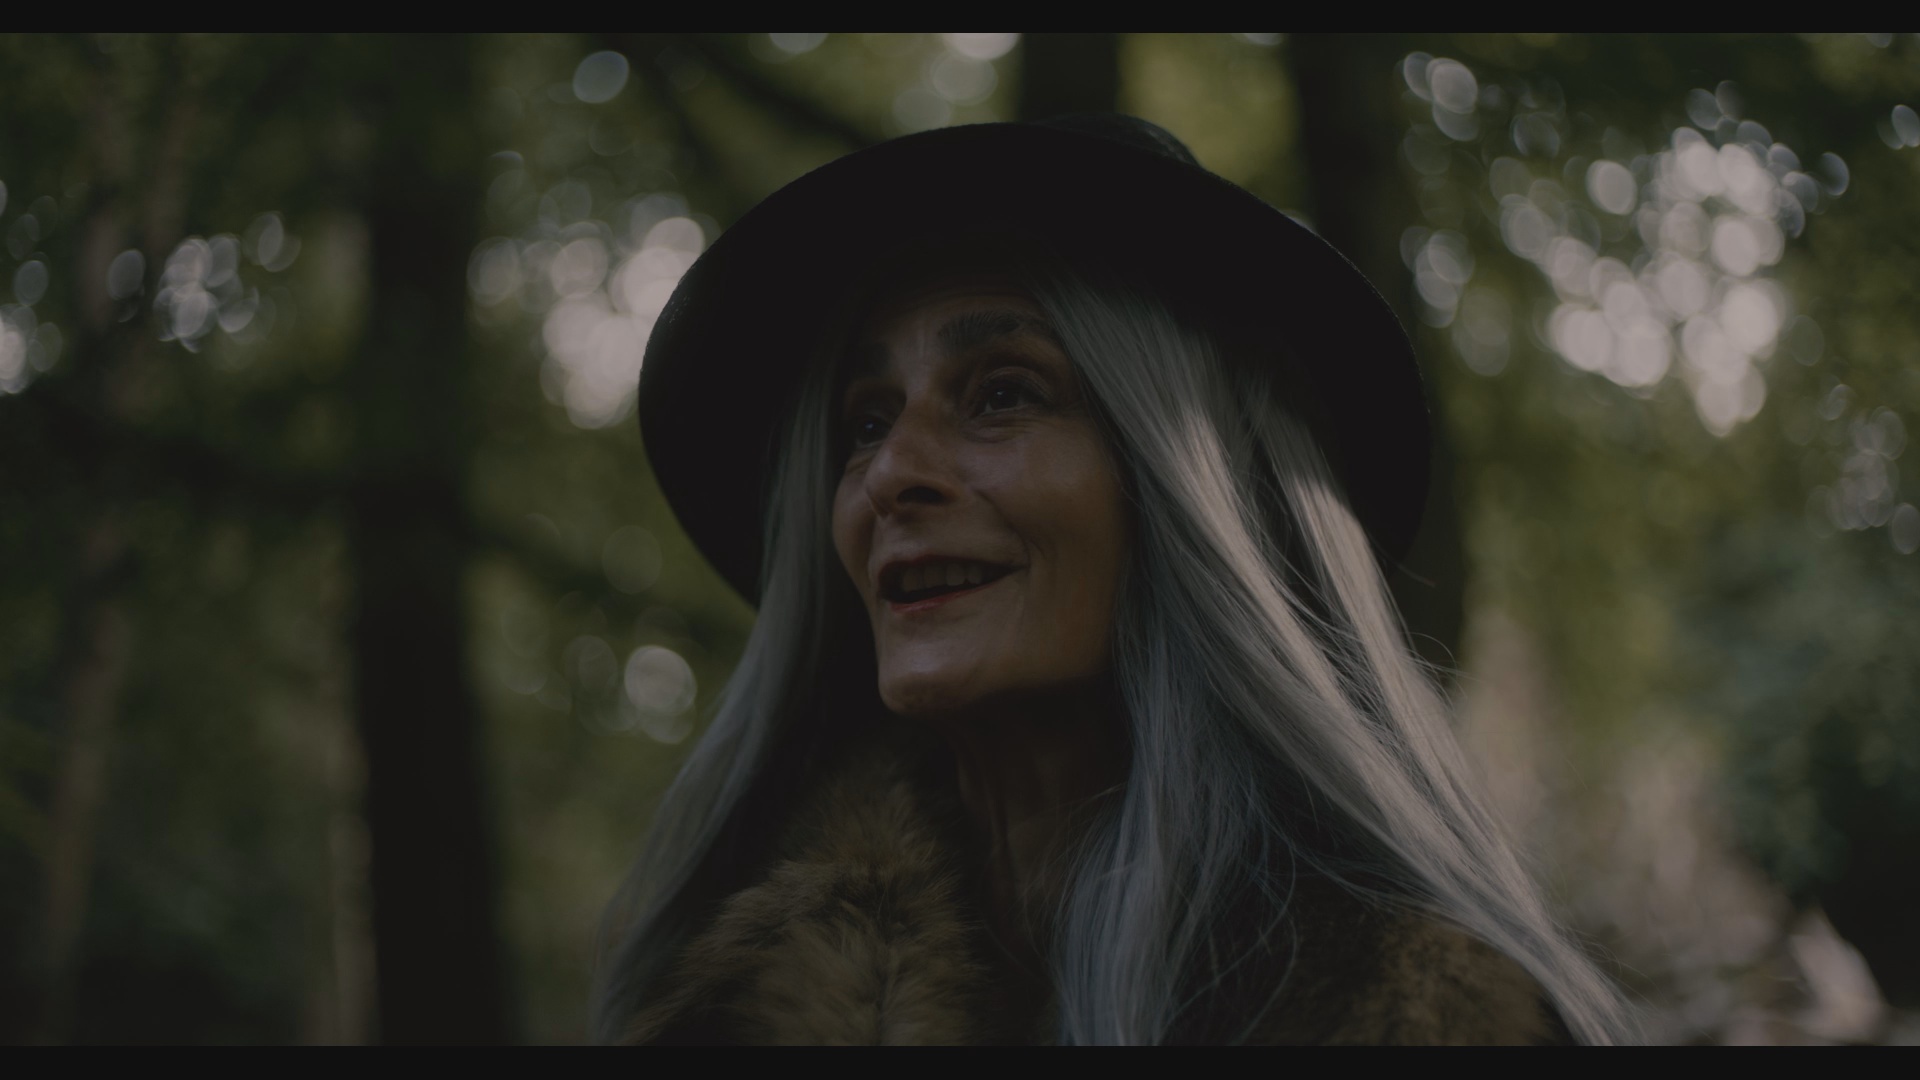 'Inherit the Witch', directed by Cradeaux Alexander & produced by Rohan Quine - still (497) - Imogen Smith as Pamela